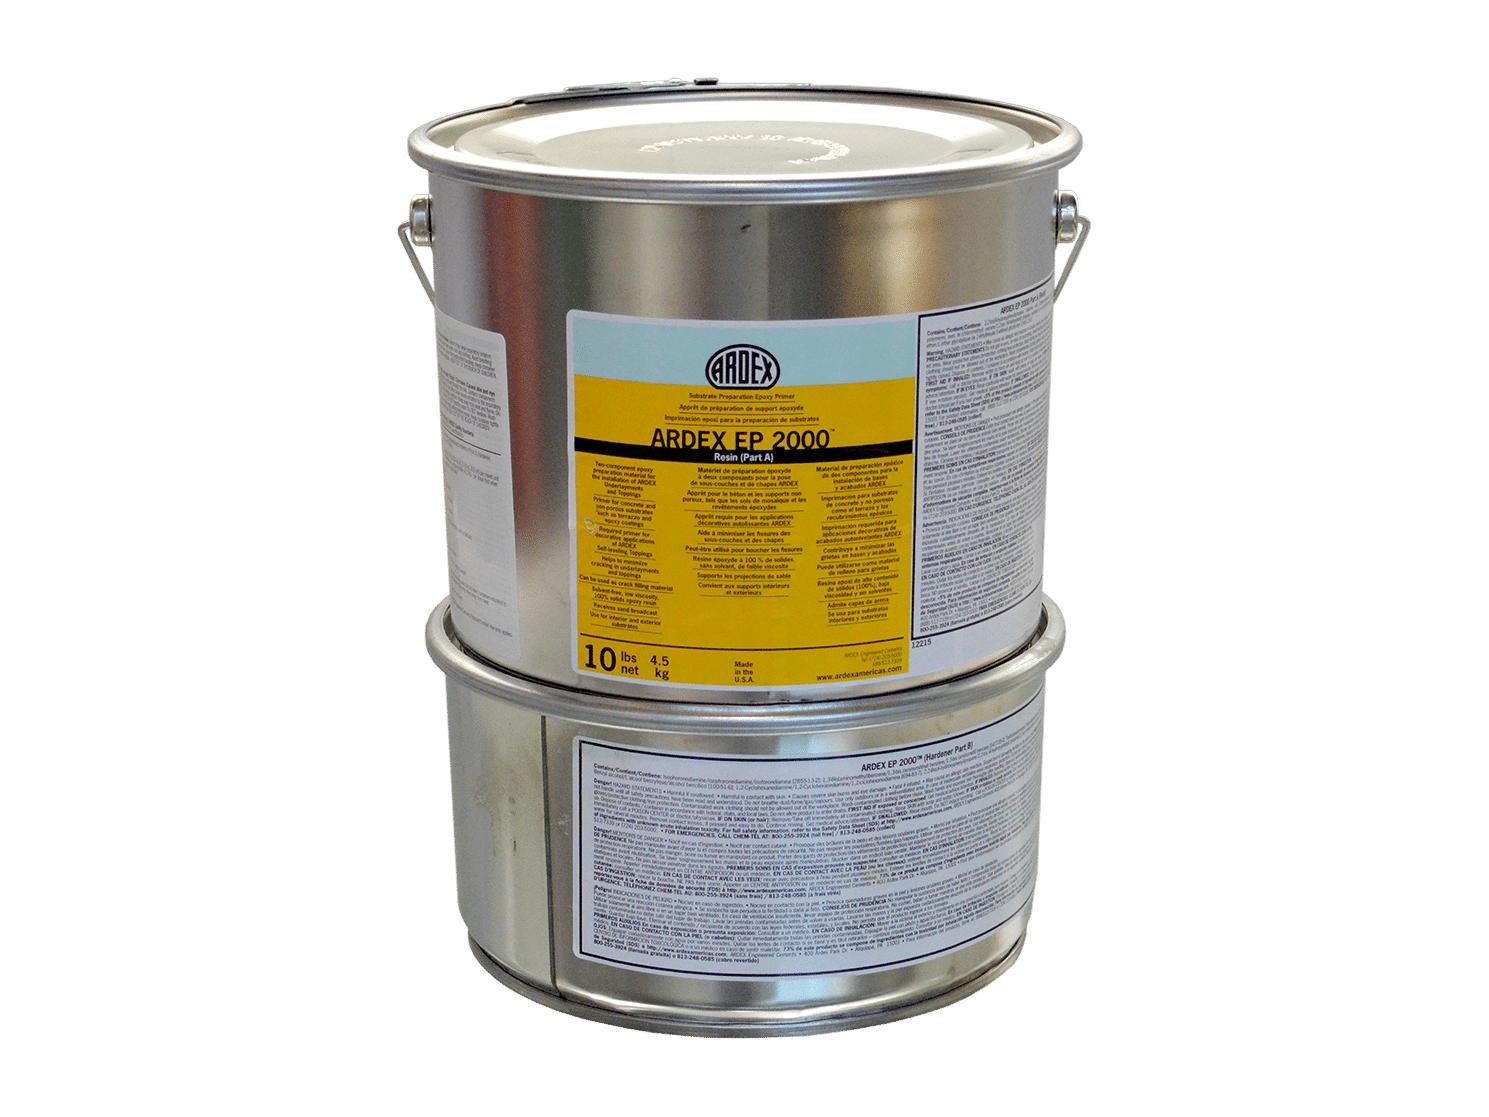 Ardex (12215) product